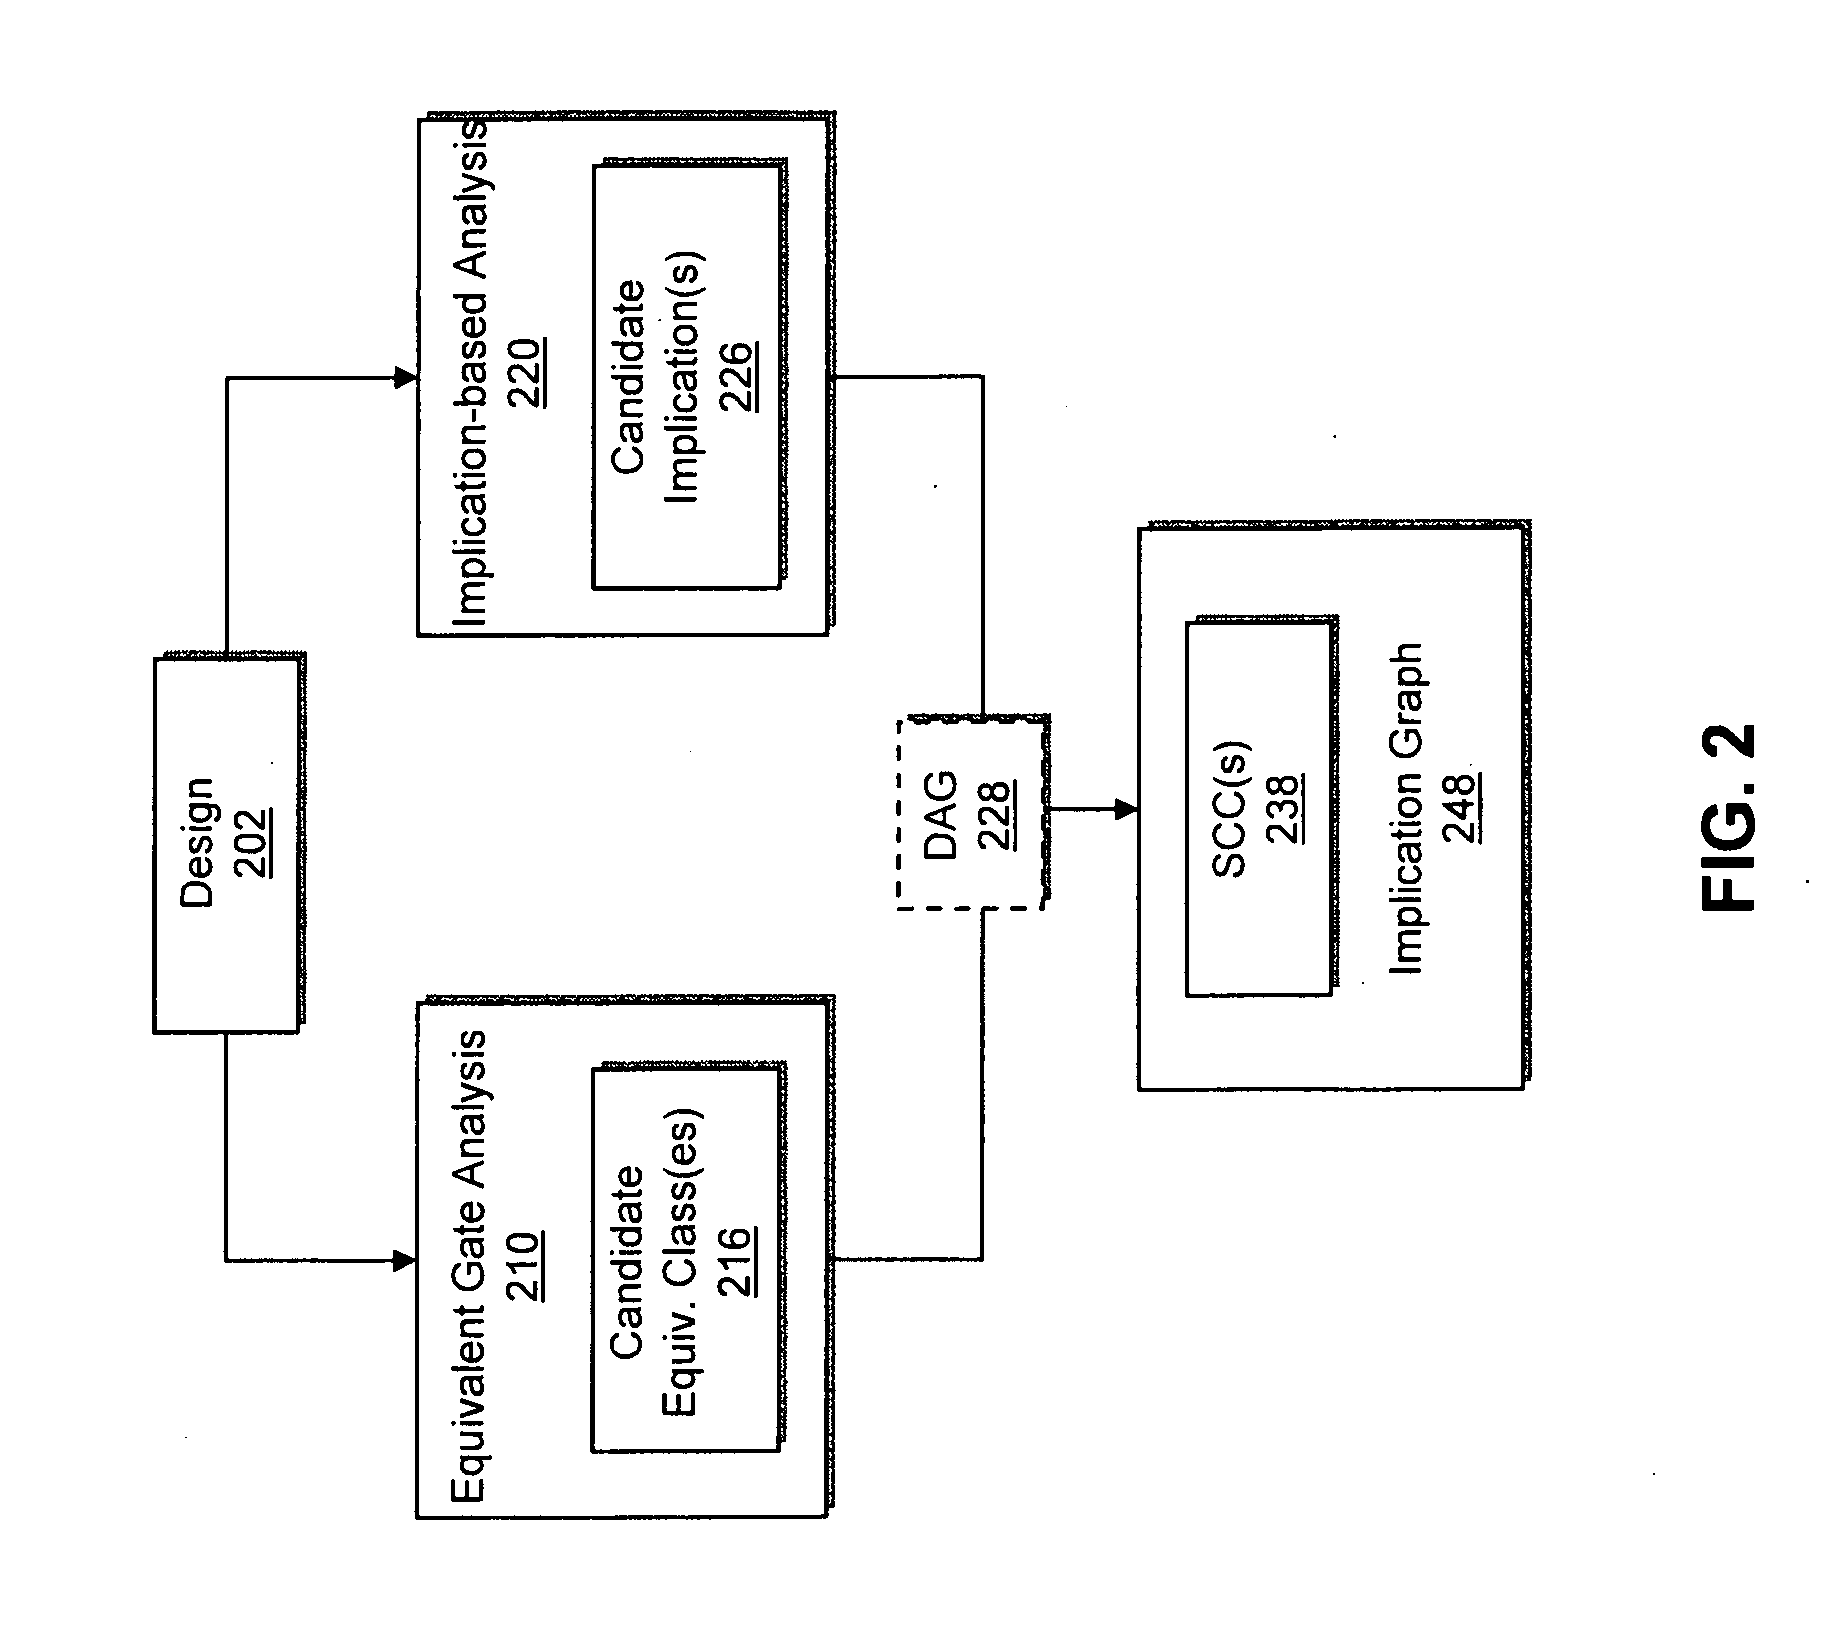 Method for scalable derivation of an implication-based reachable state set overapproximation